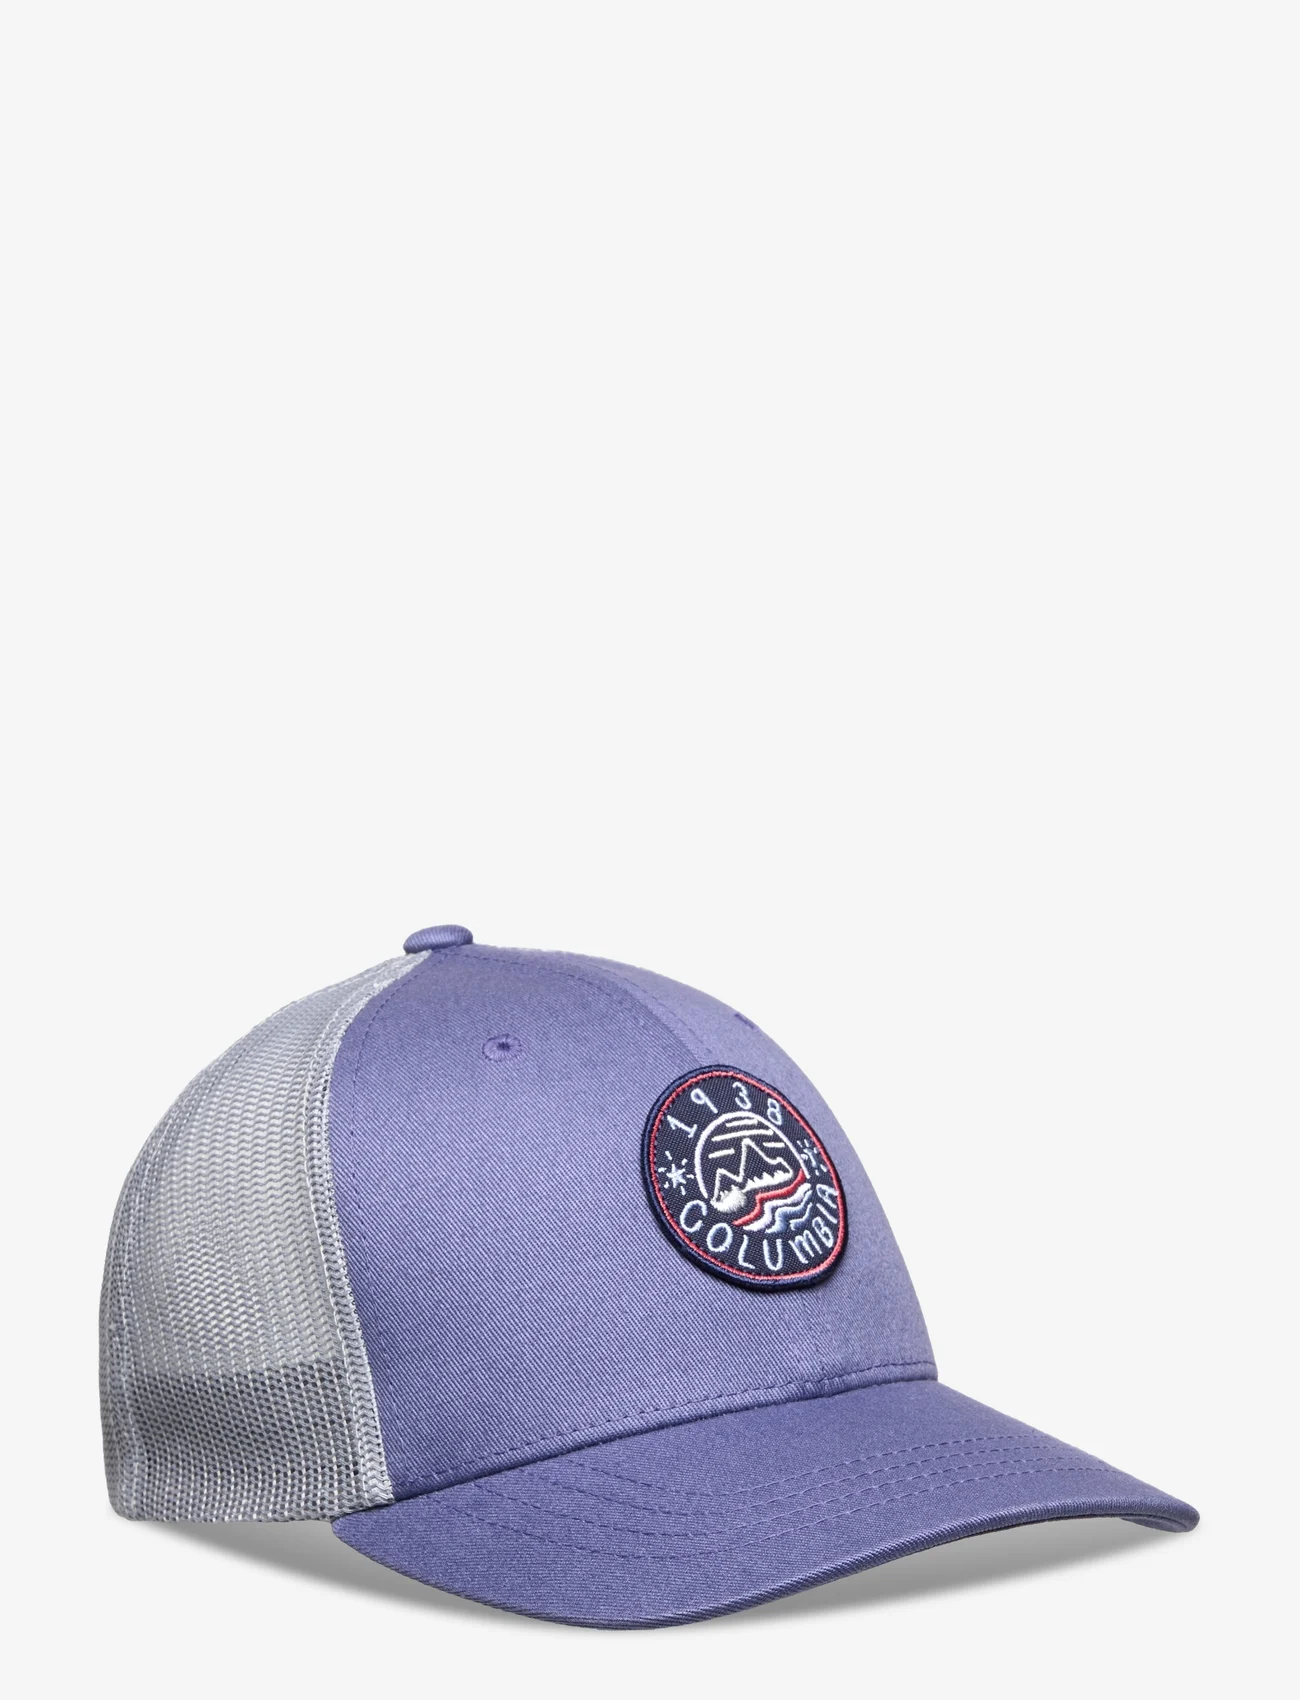 Columbia Sportswear - Columbia Youth Snap Back - gode sommertilbud - eve, cirrus grey, hot marker waves - 0